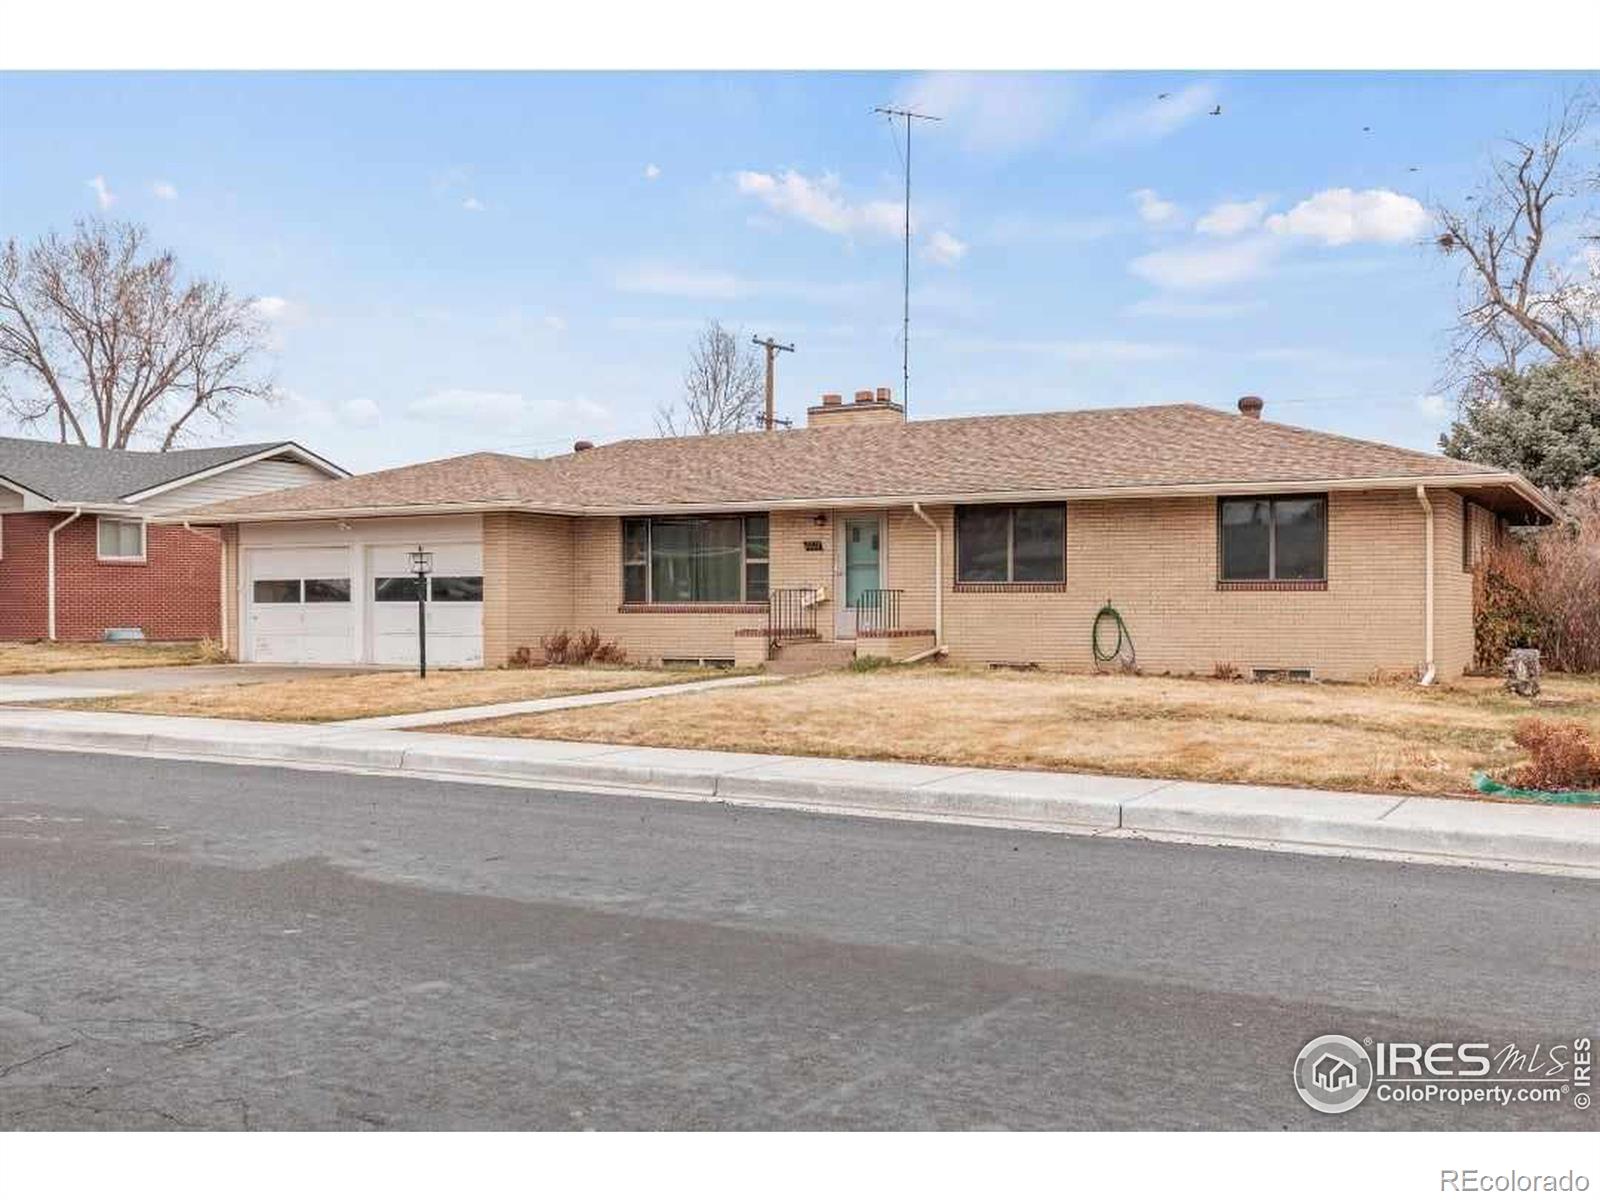 2223  12th St Rd, greeley MLS: 4567891005276 Beds: 4 Baths: 3 Price: $389,000